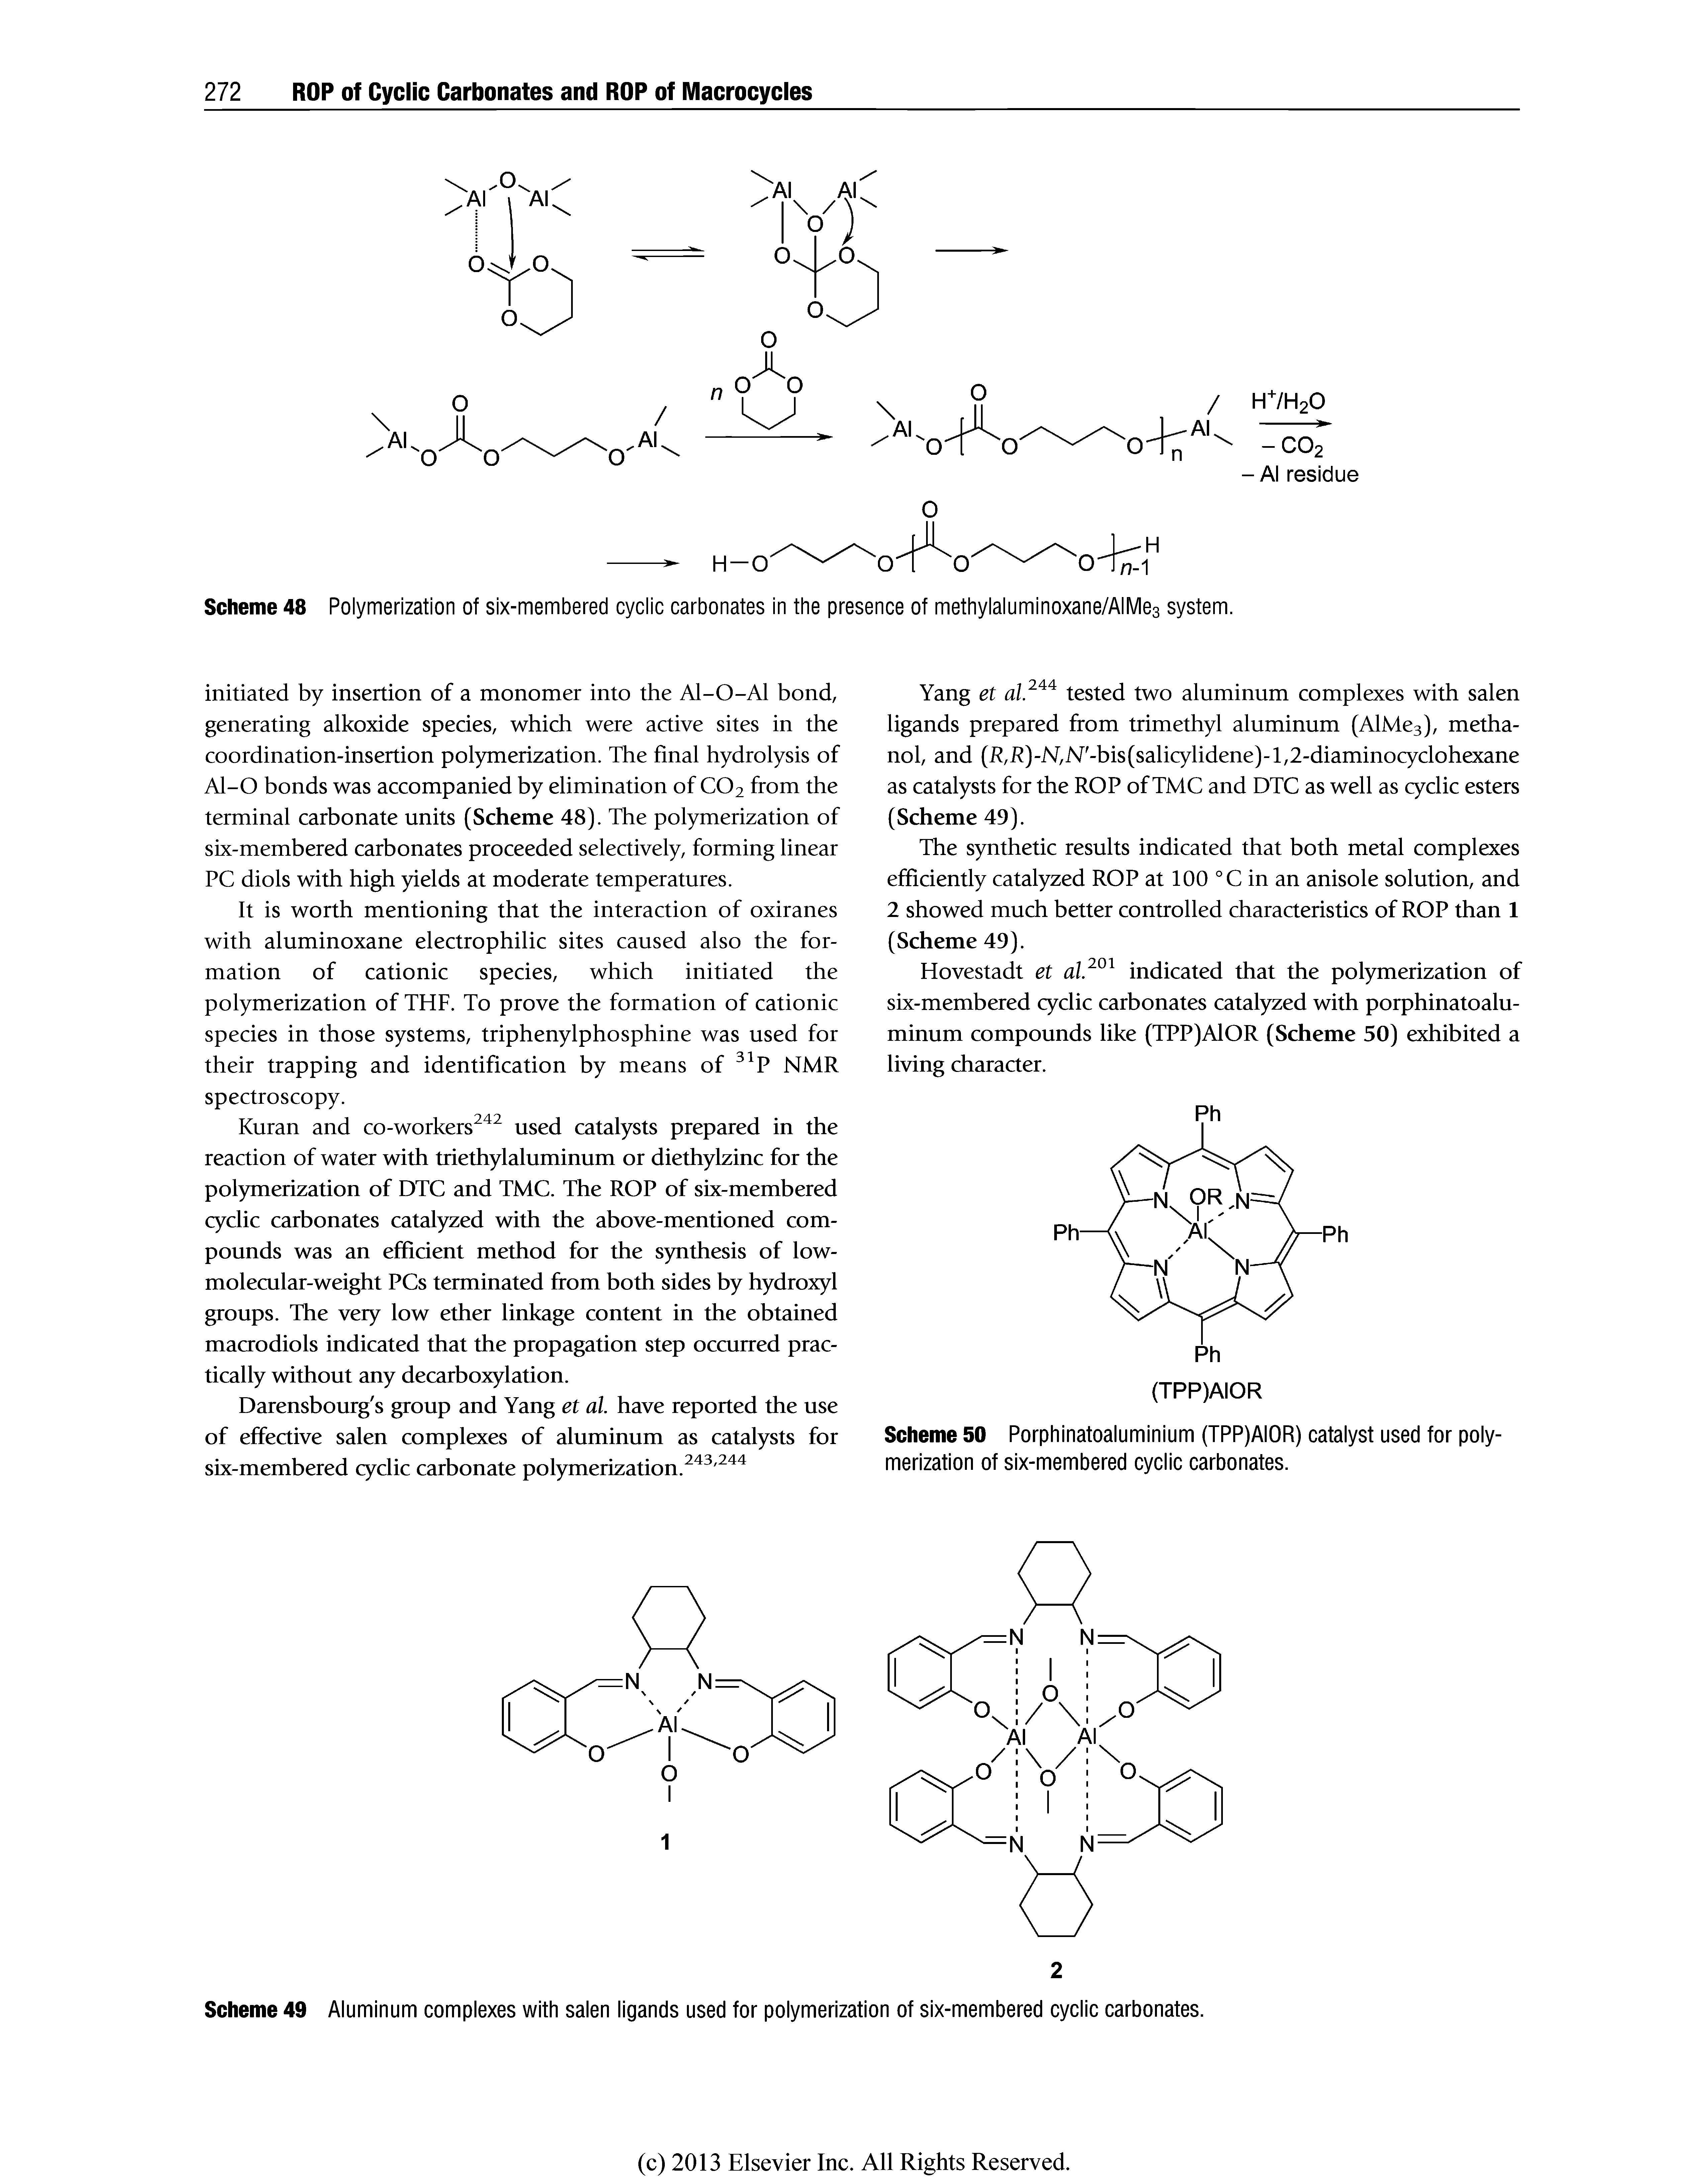 Scheme 49 Aluminum complexes with salen ligands used for polymerization of six-membered cyclic carbonates.